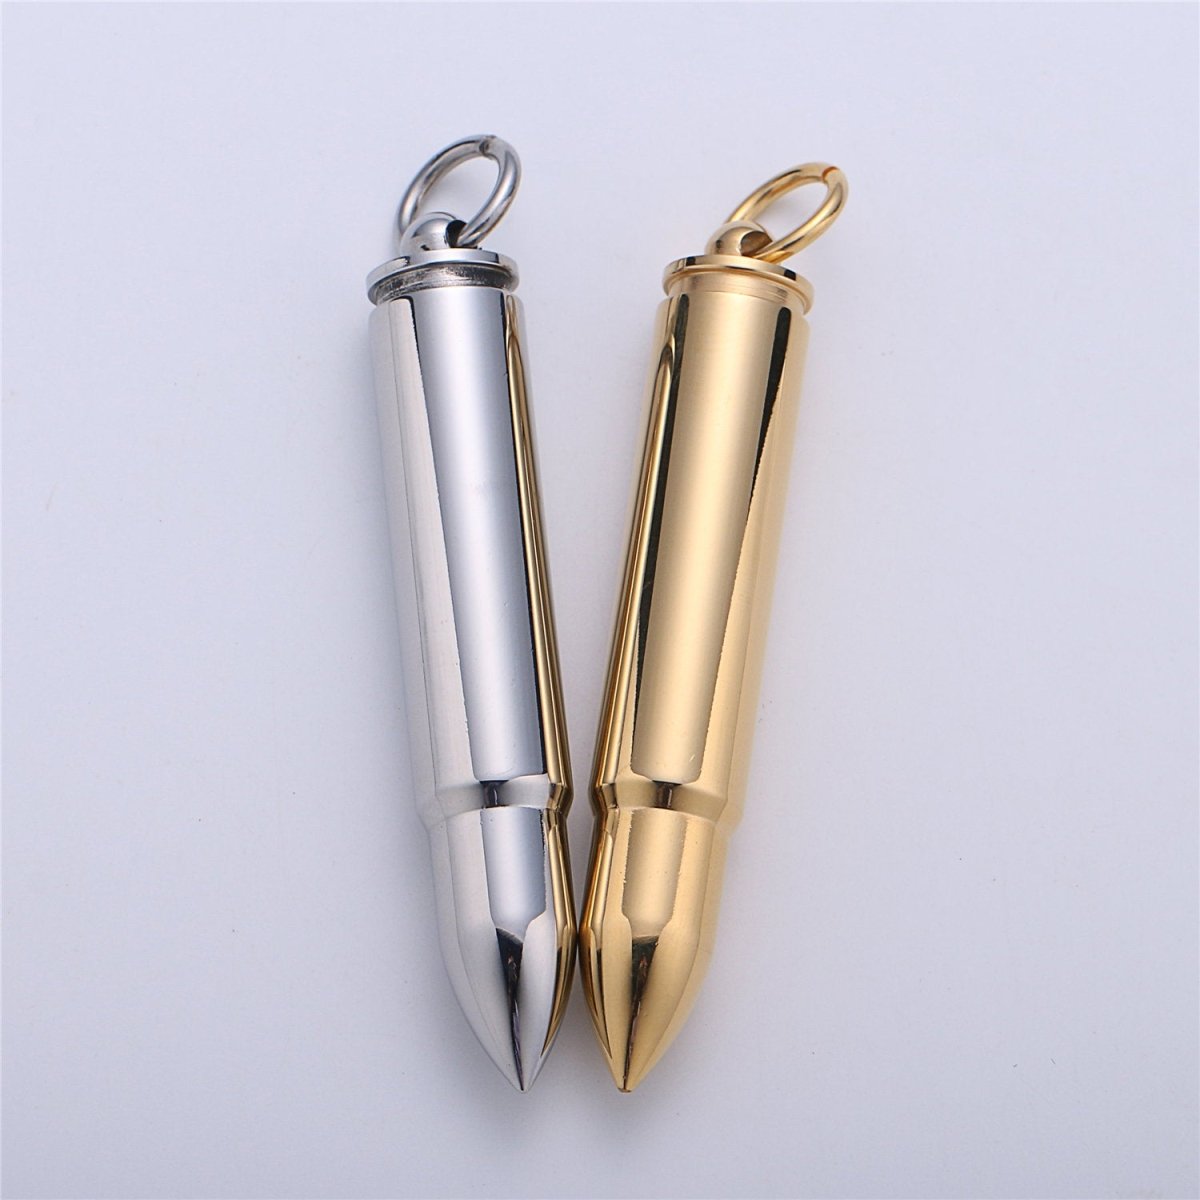 Mens Stainless Steel Bullet Pendant Necklaces Urn Ashes Necklace Supply for Cremation Memorial Keepsakes in Gold Silver Ammo E-664 - DLUXCA